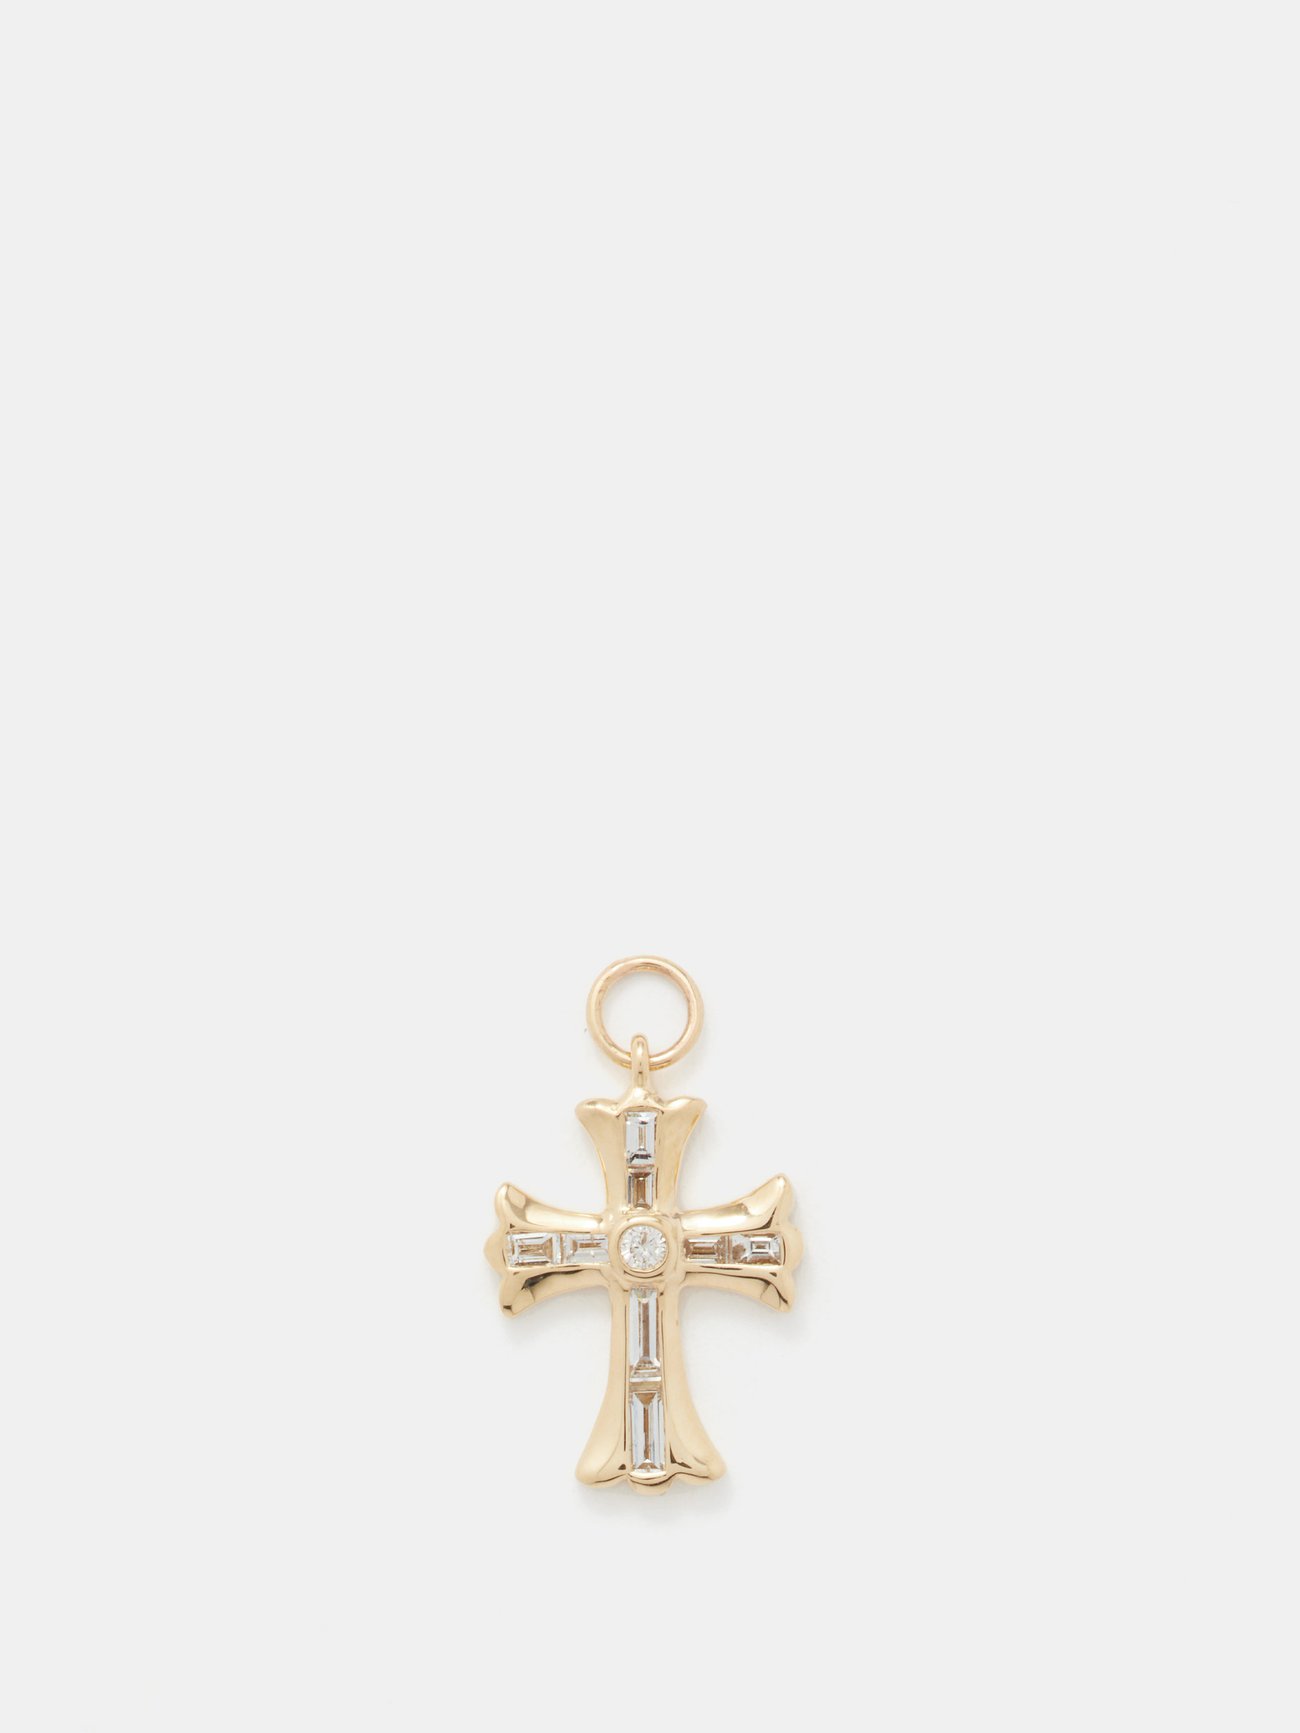 Jacquie Aiche Charm Clasp 14K Yellow Gold